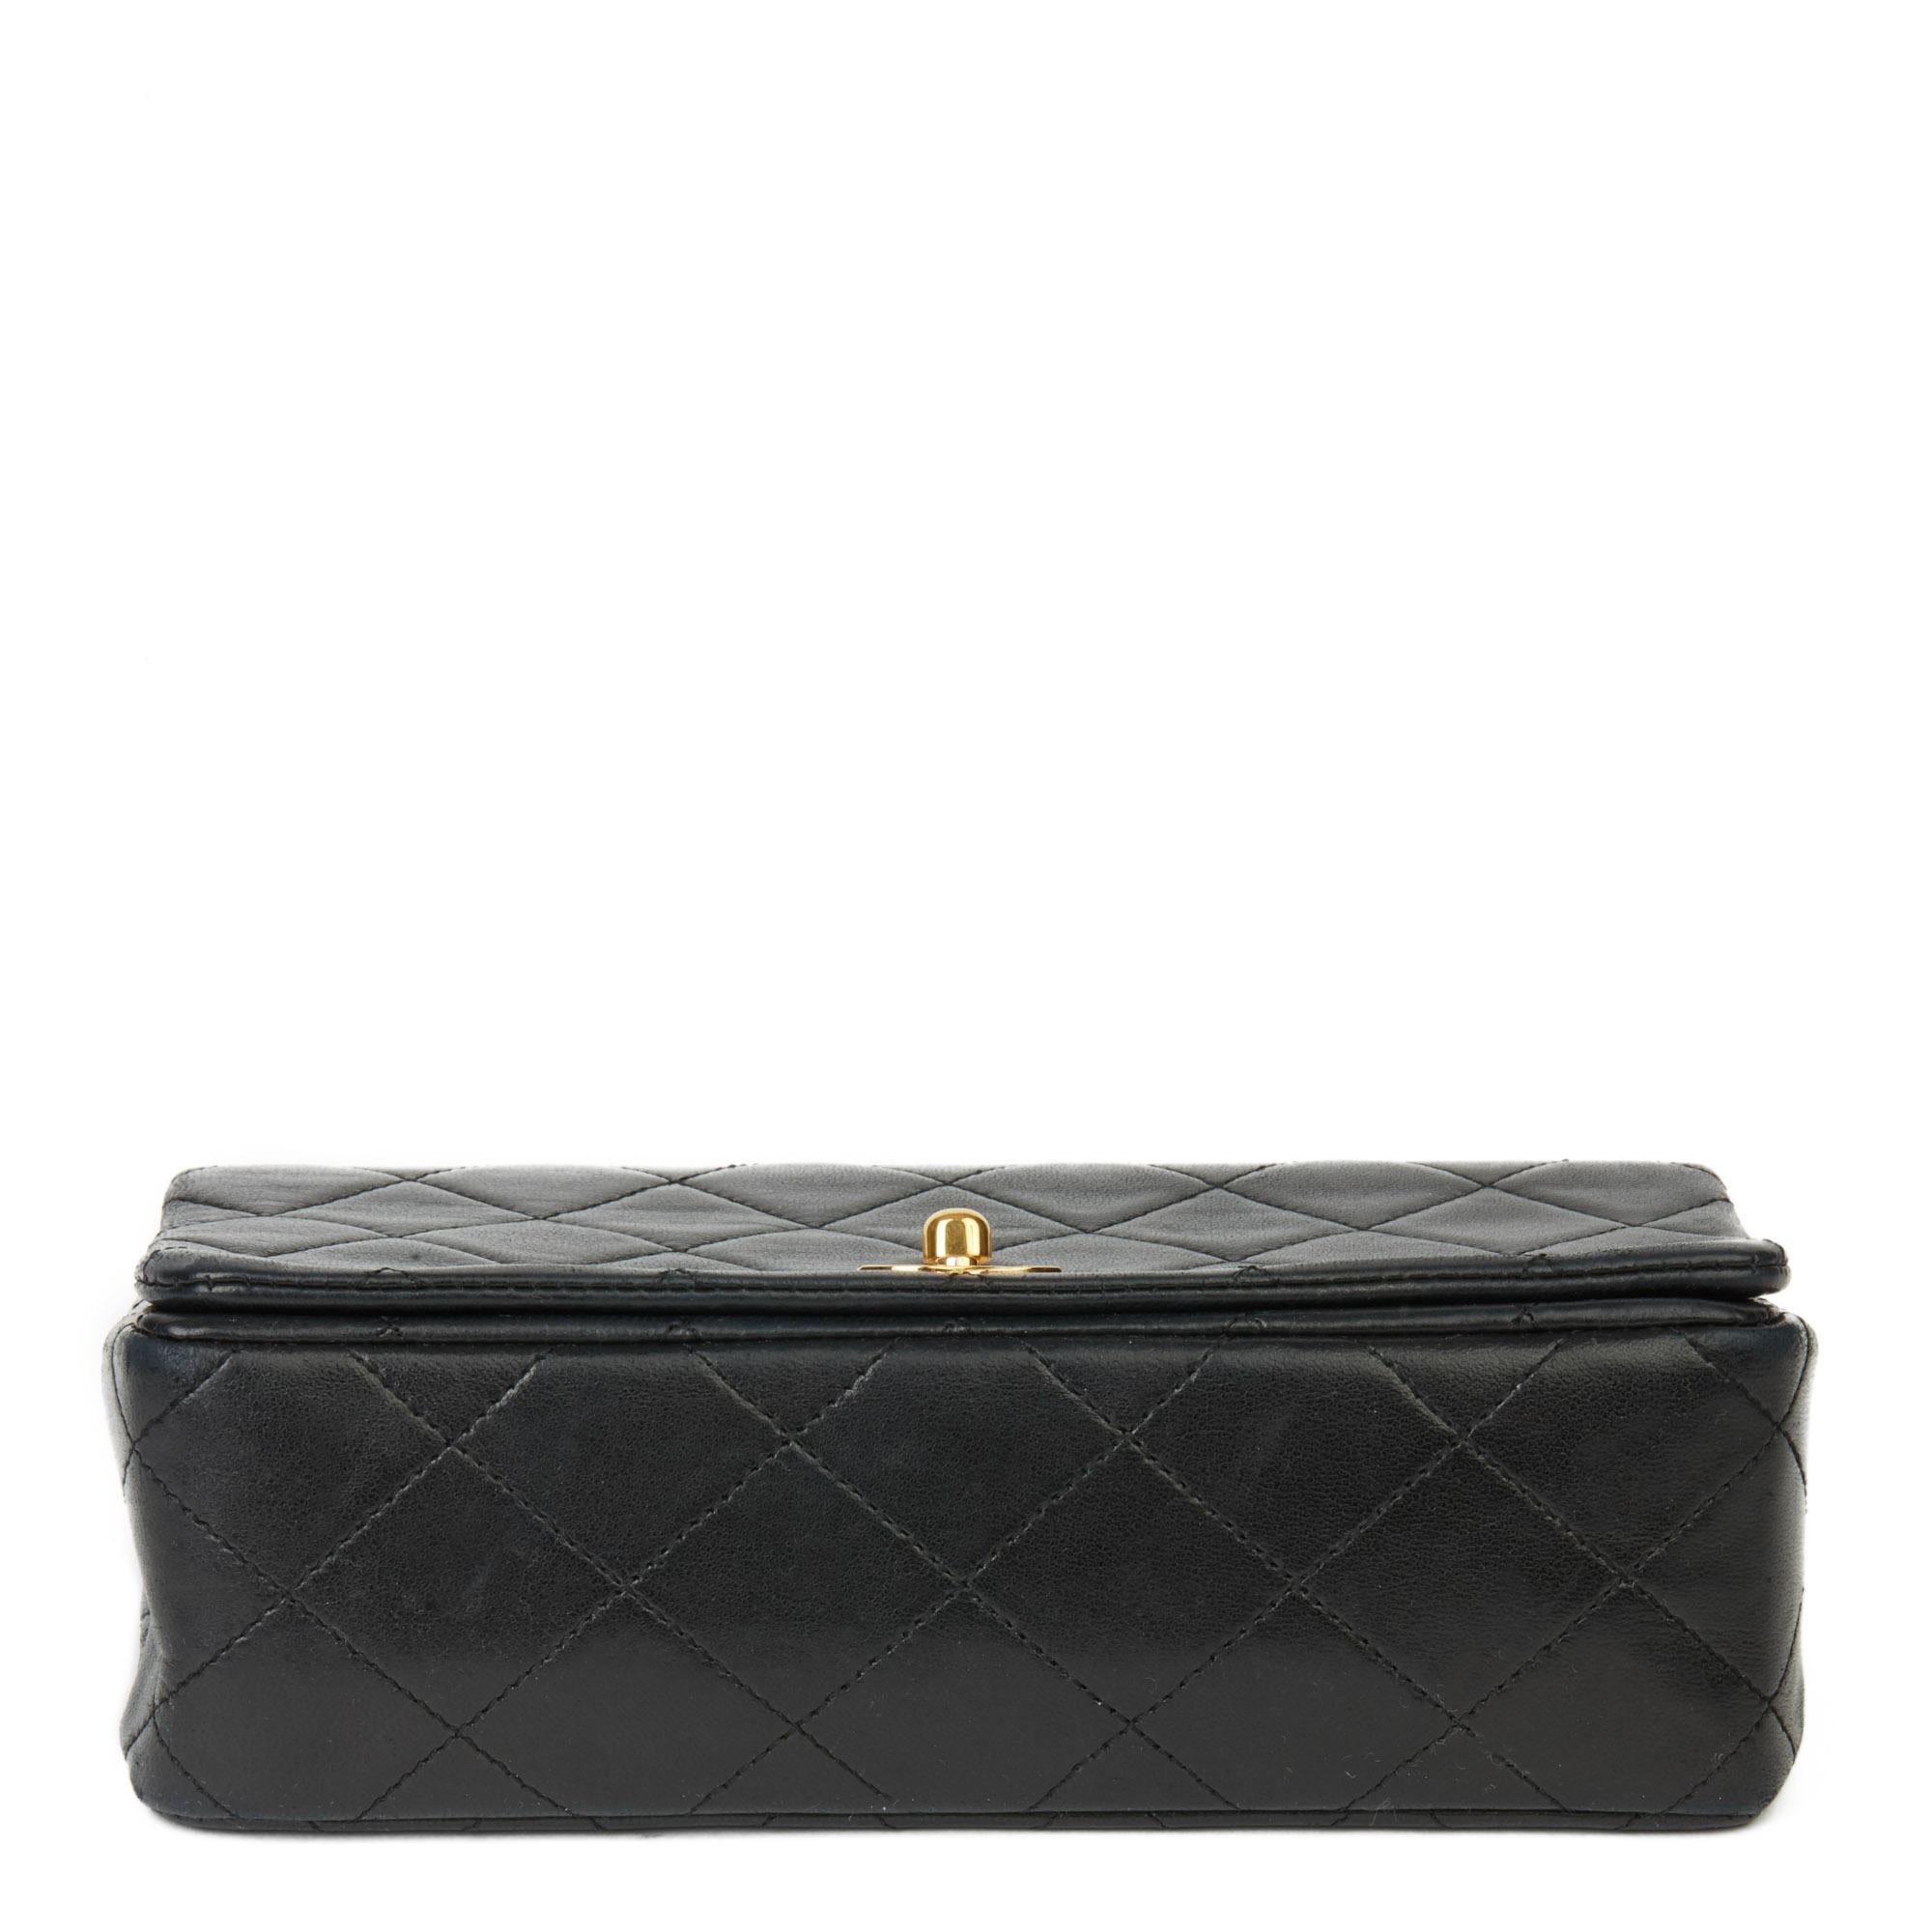 1990 Chanel Black Quilted Lambskin Vintage Mini Flap Bag 1